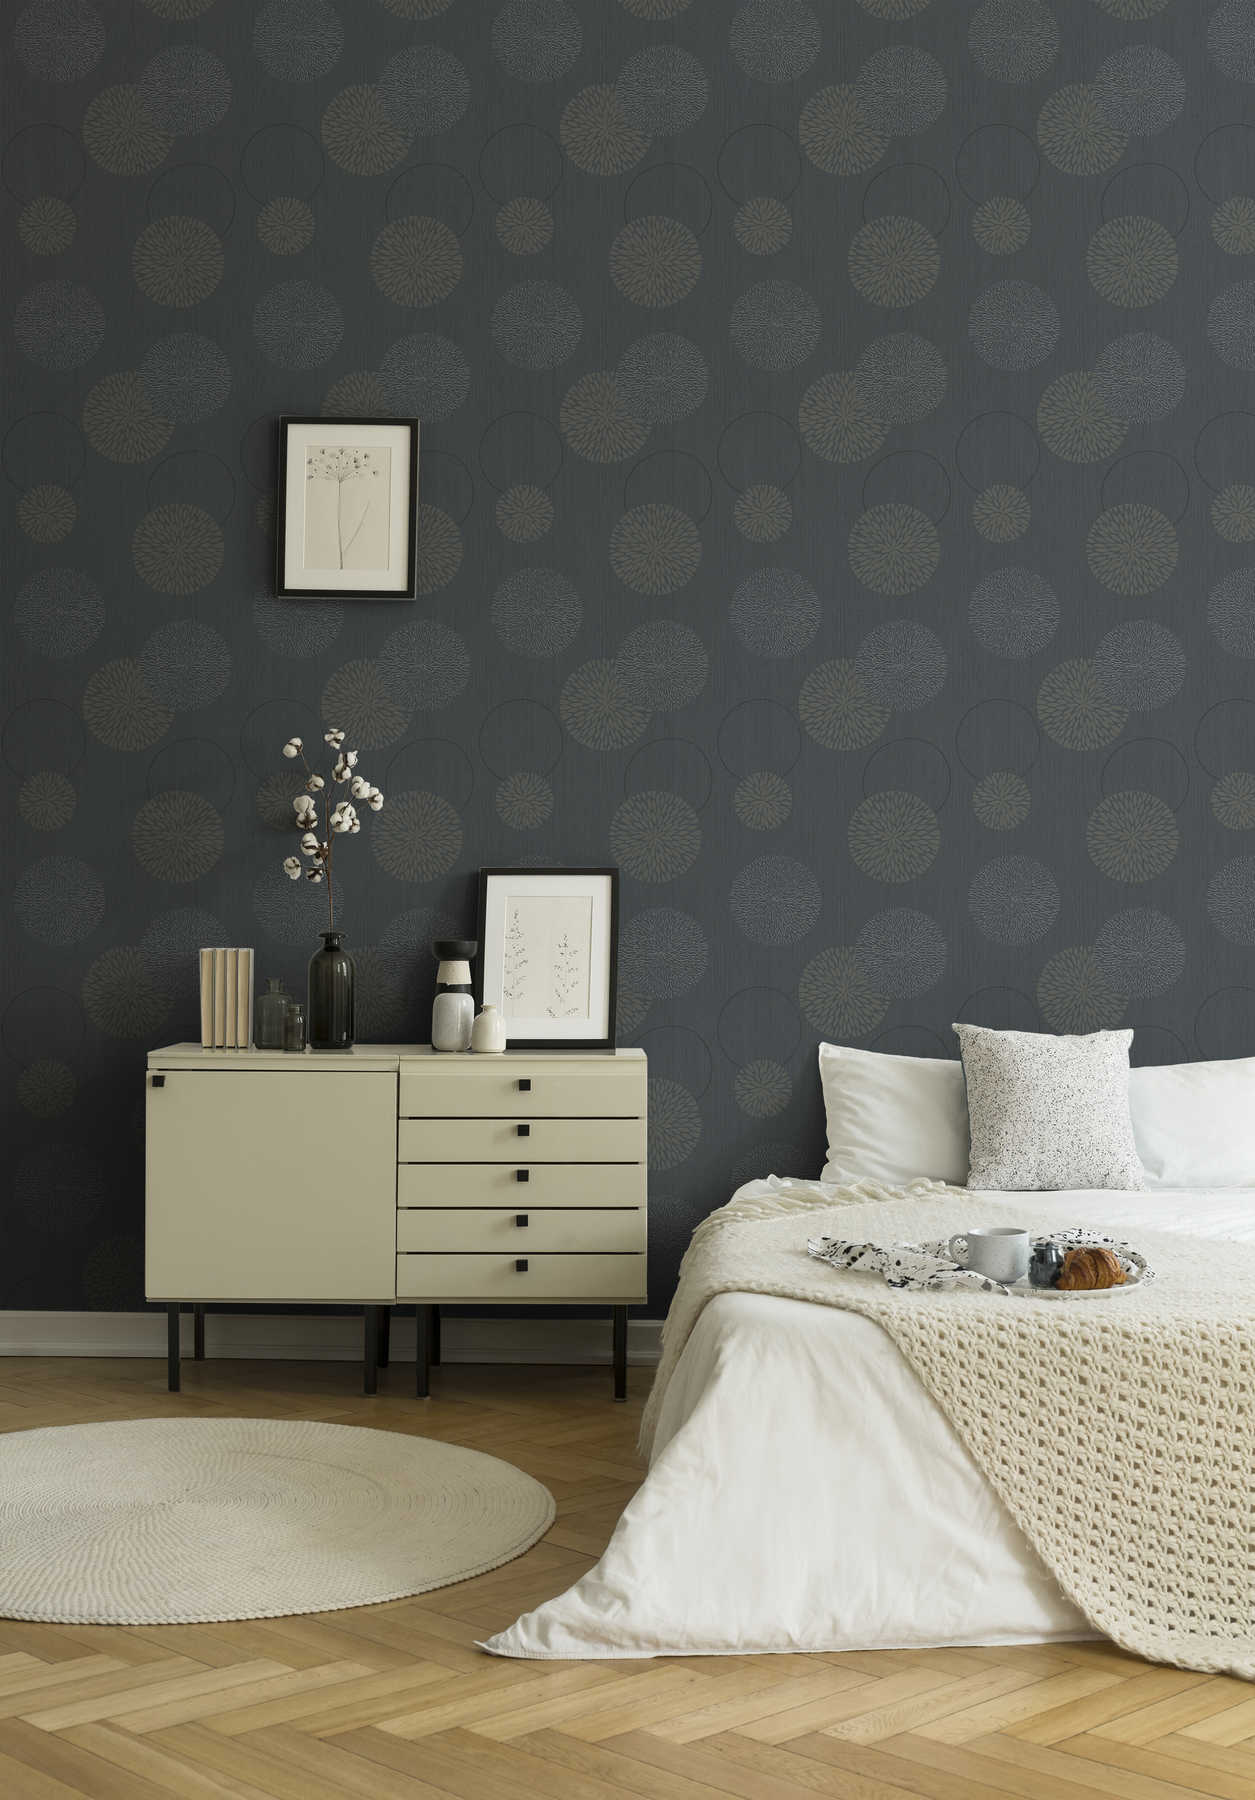             Non-woven wallpaper flowers in abstract design - grey, black
        